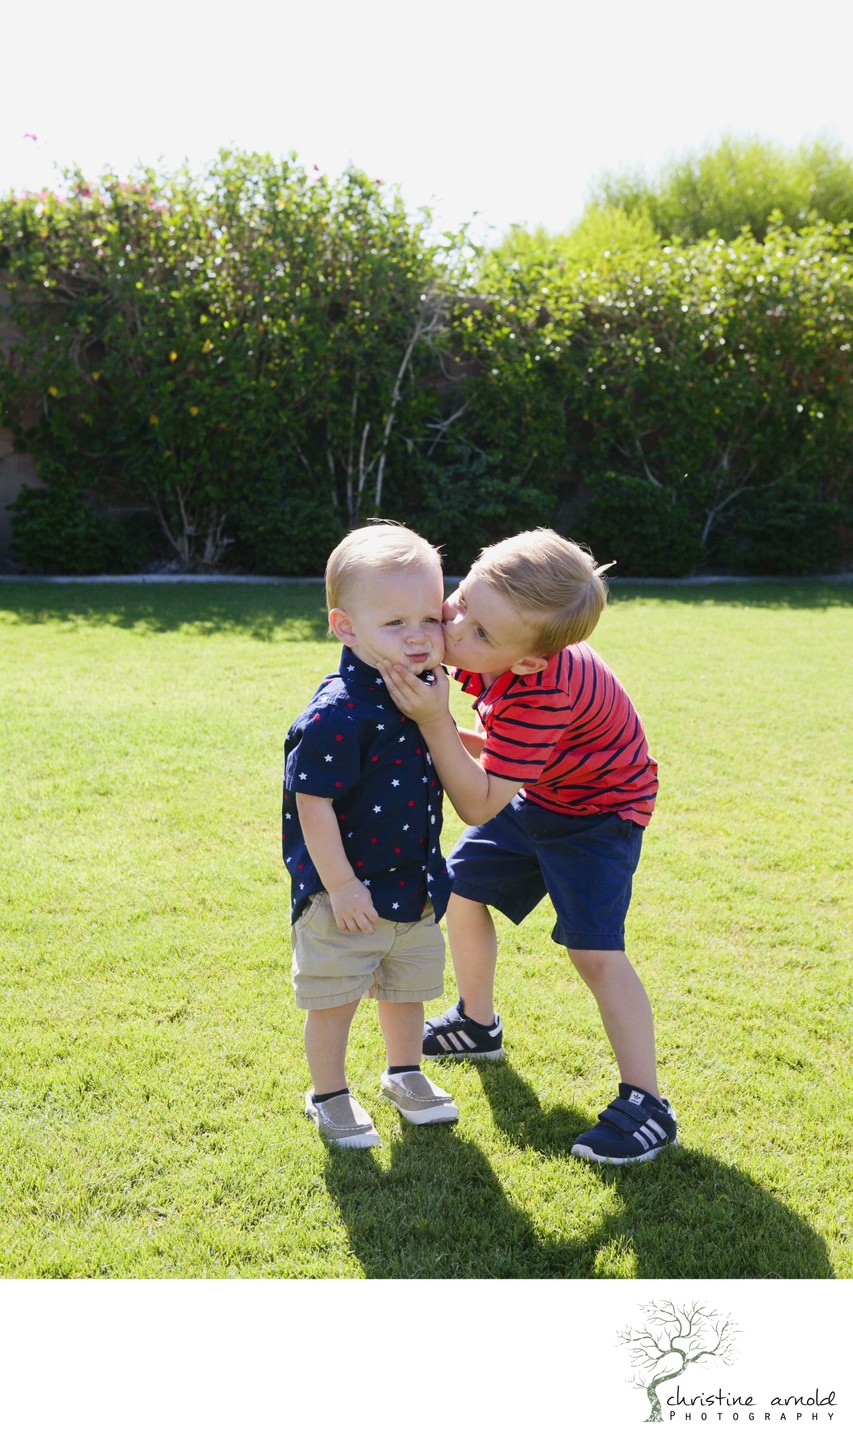 Brothers, candid family captures at private home, Indio